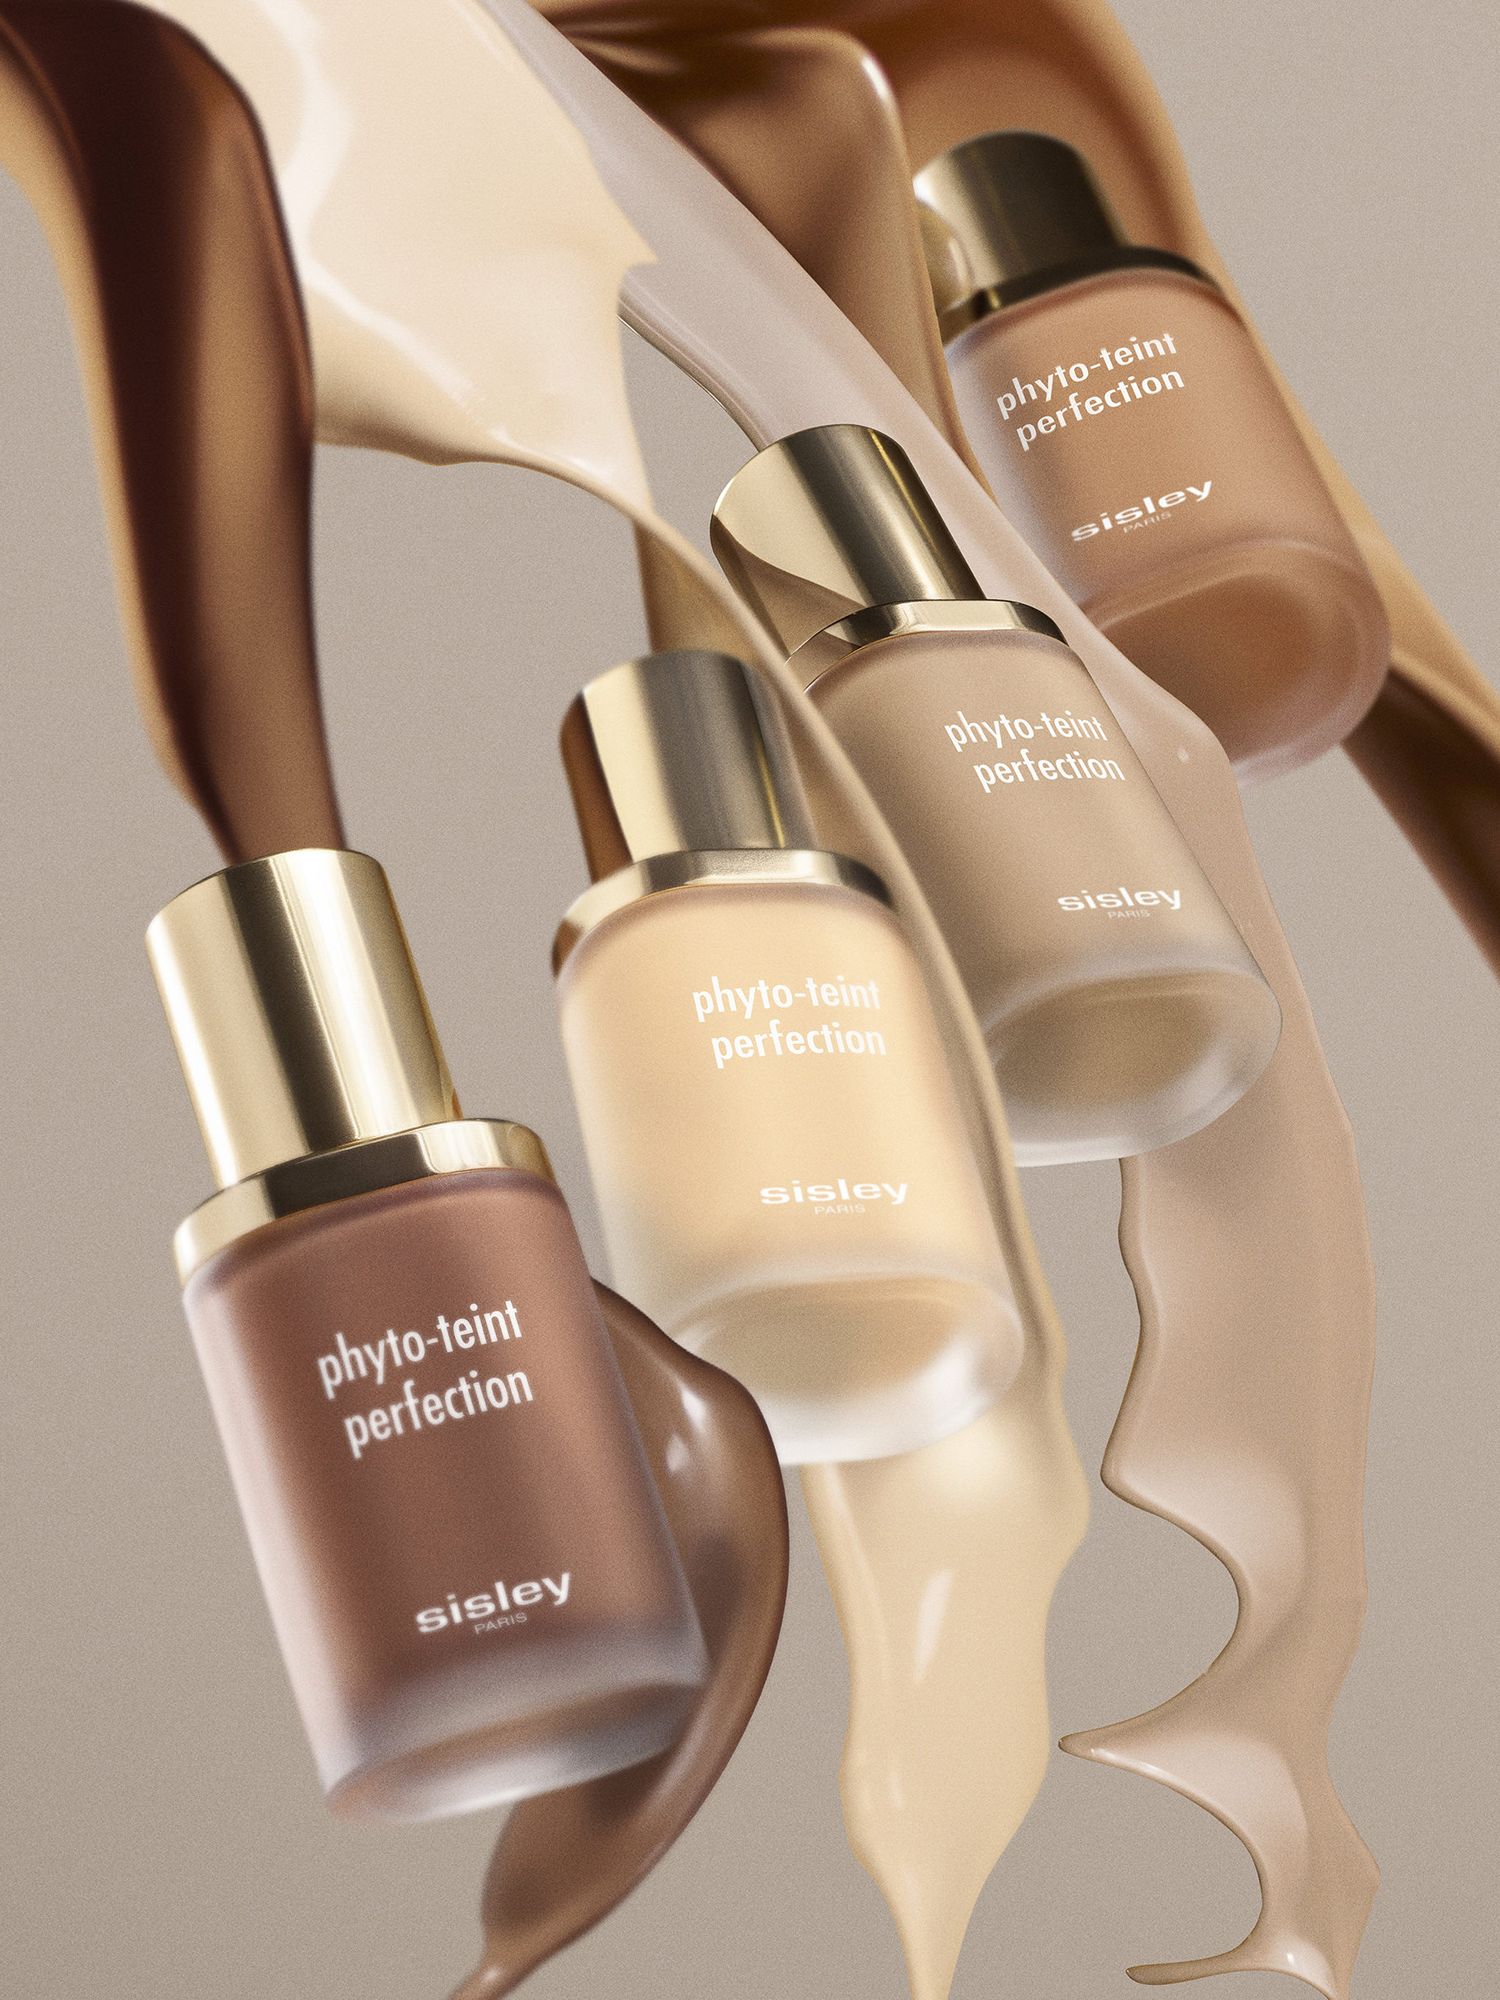 Sisley-Paris Phyto-Teint Perfection Foundation, 4N Biscuit 7